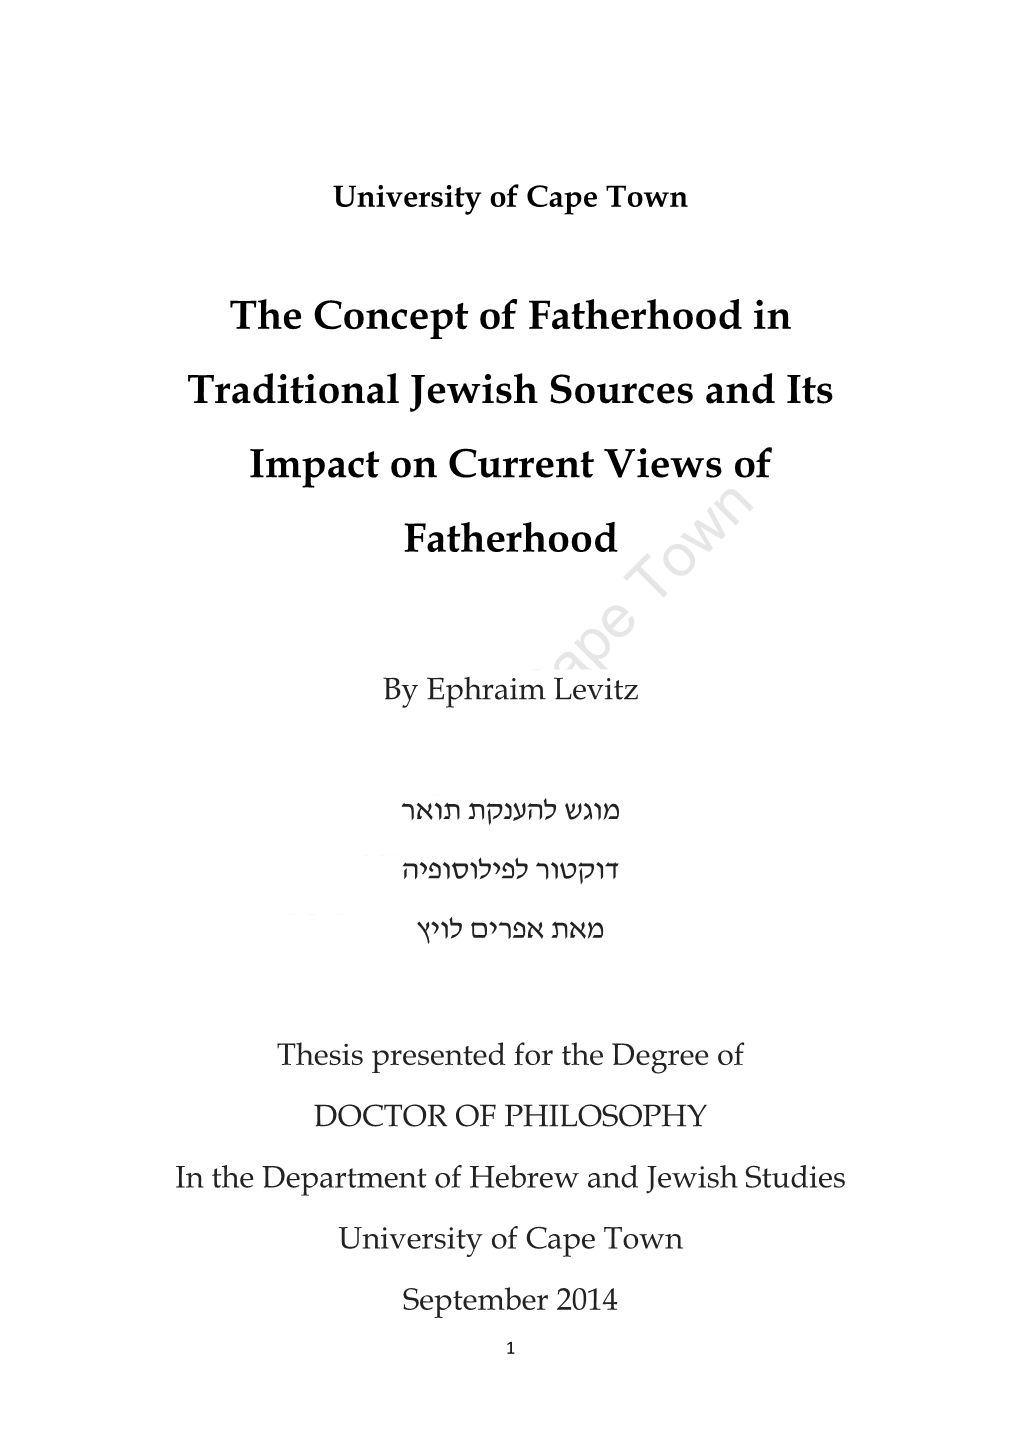 The Concept of Fatherhood in Traditional Jewish Sources and Its Impact on Current Views of Fatherhood